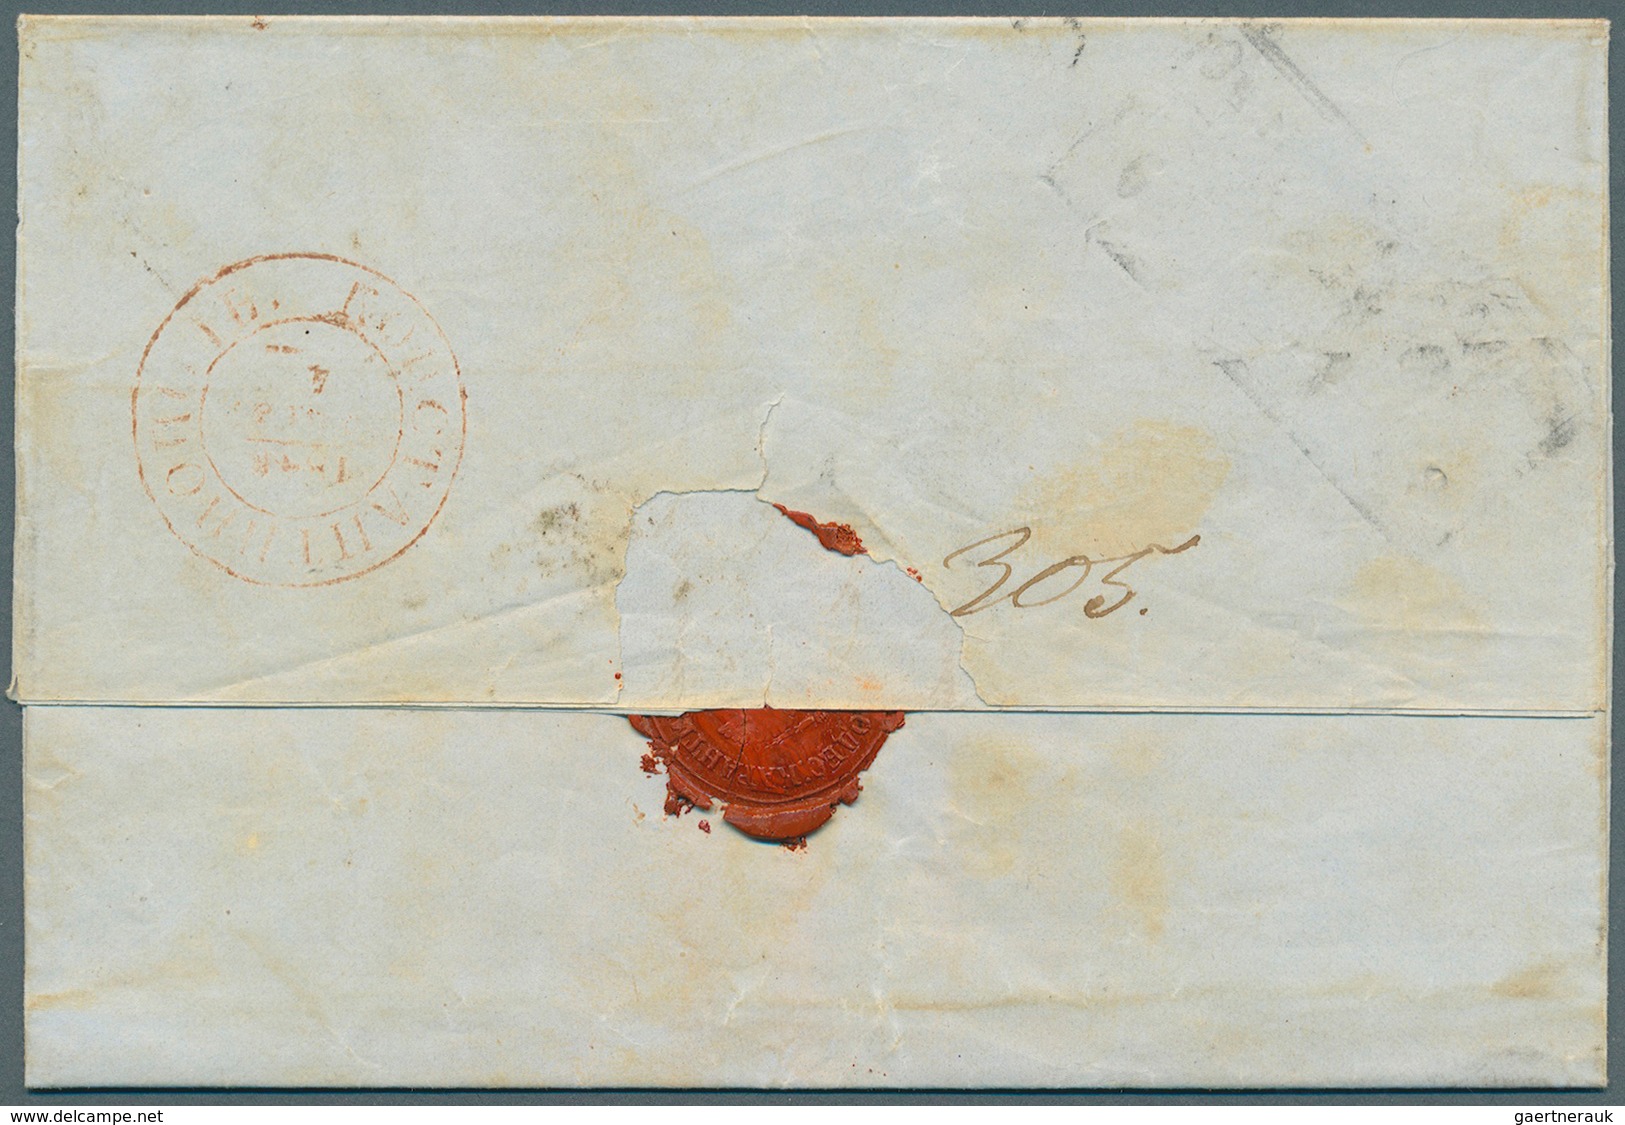 Russische Post In Der Levante - Staatspost: 1848, Letter From Constantinopel Wih Red Post Mark Of Th - Levant